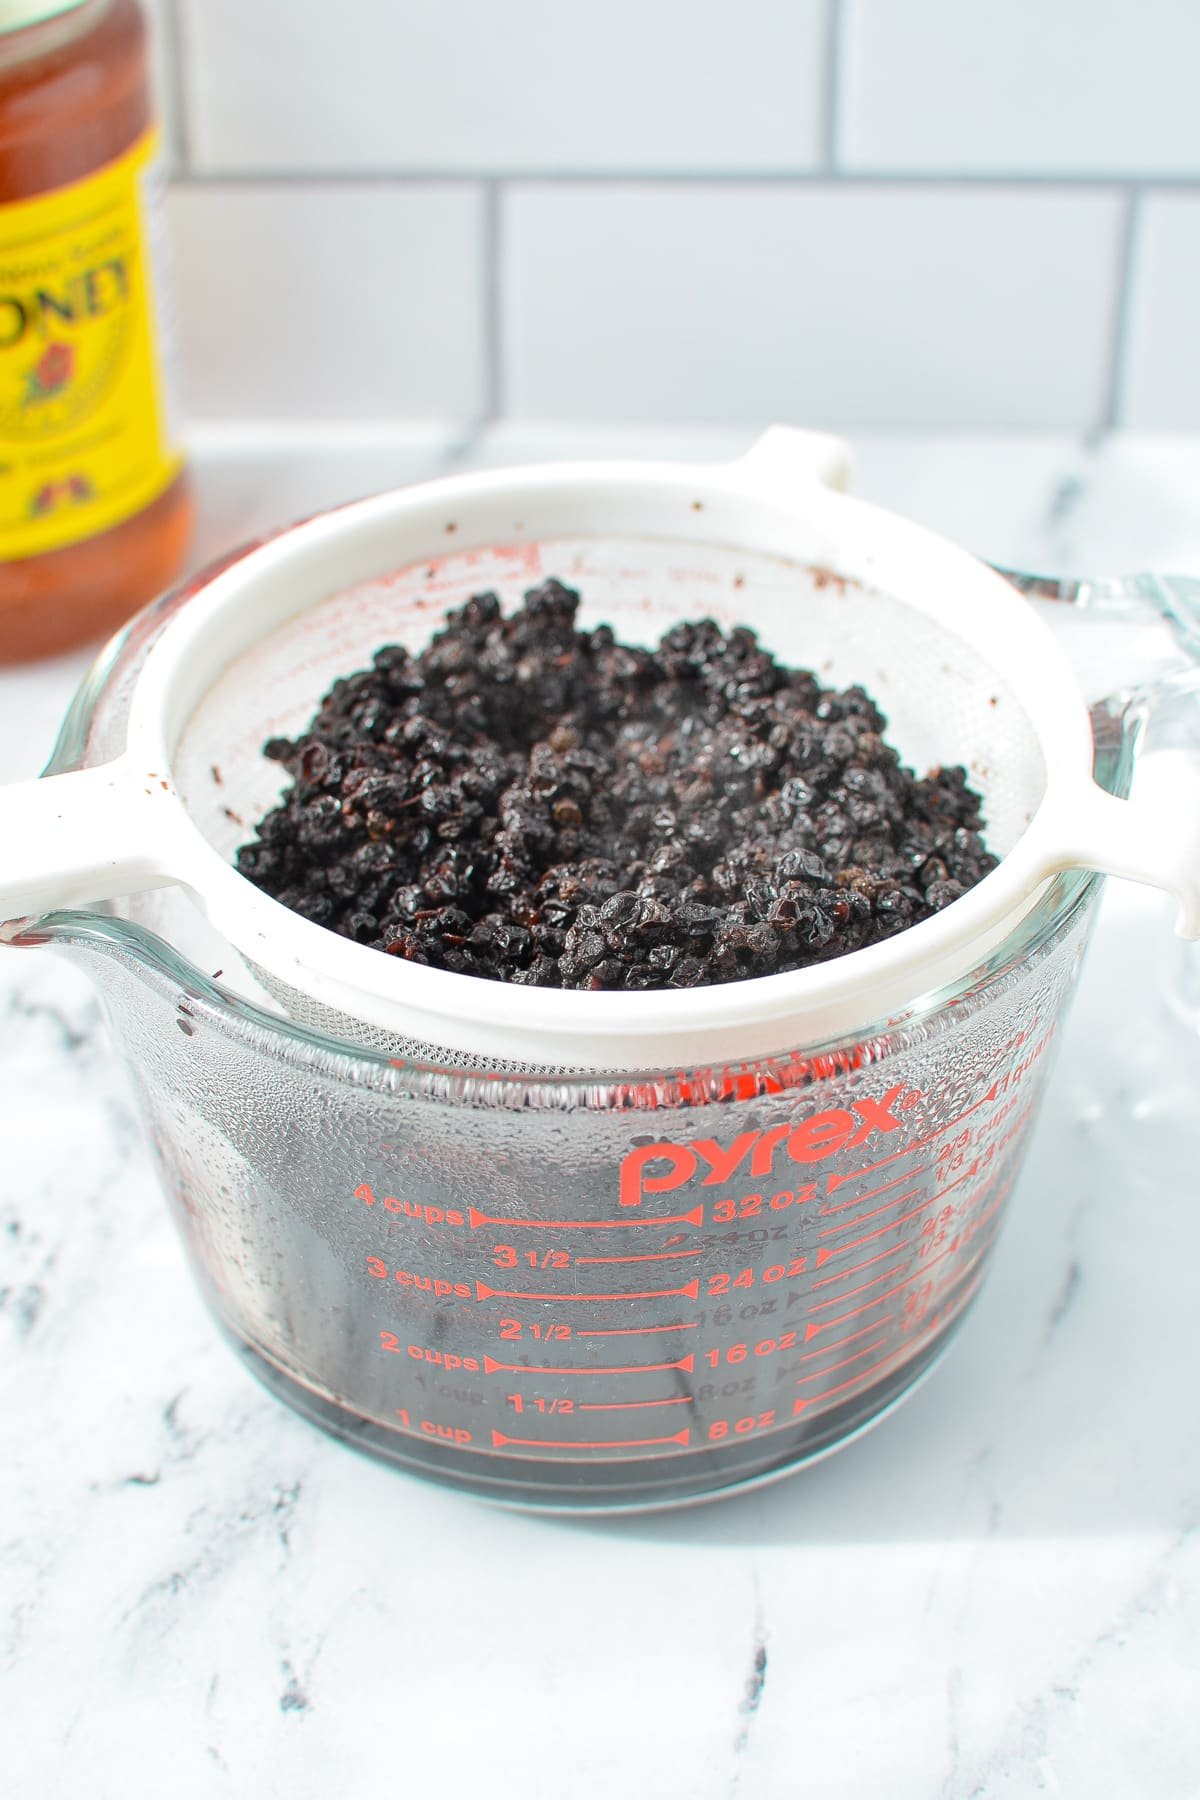 A measuring cup with a strainer set over it, collecting the juices from draining elderberries.